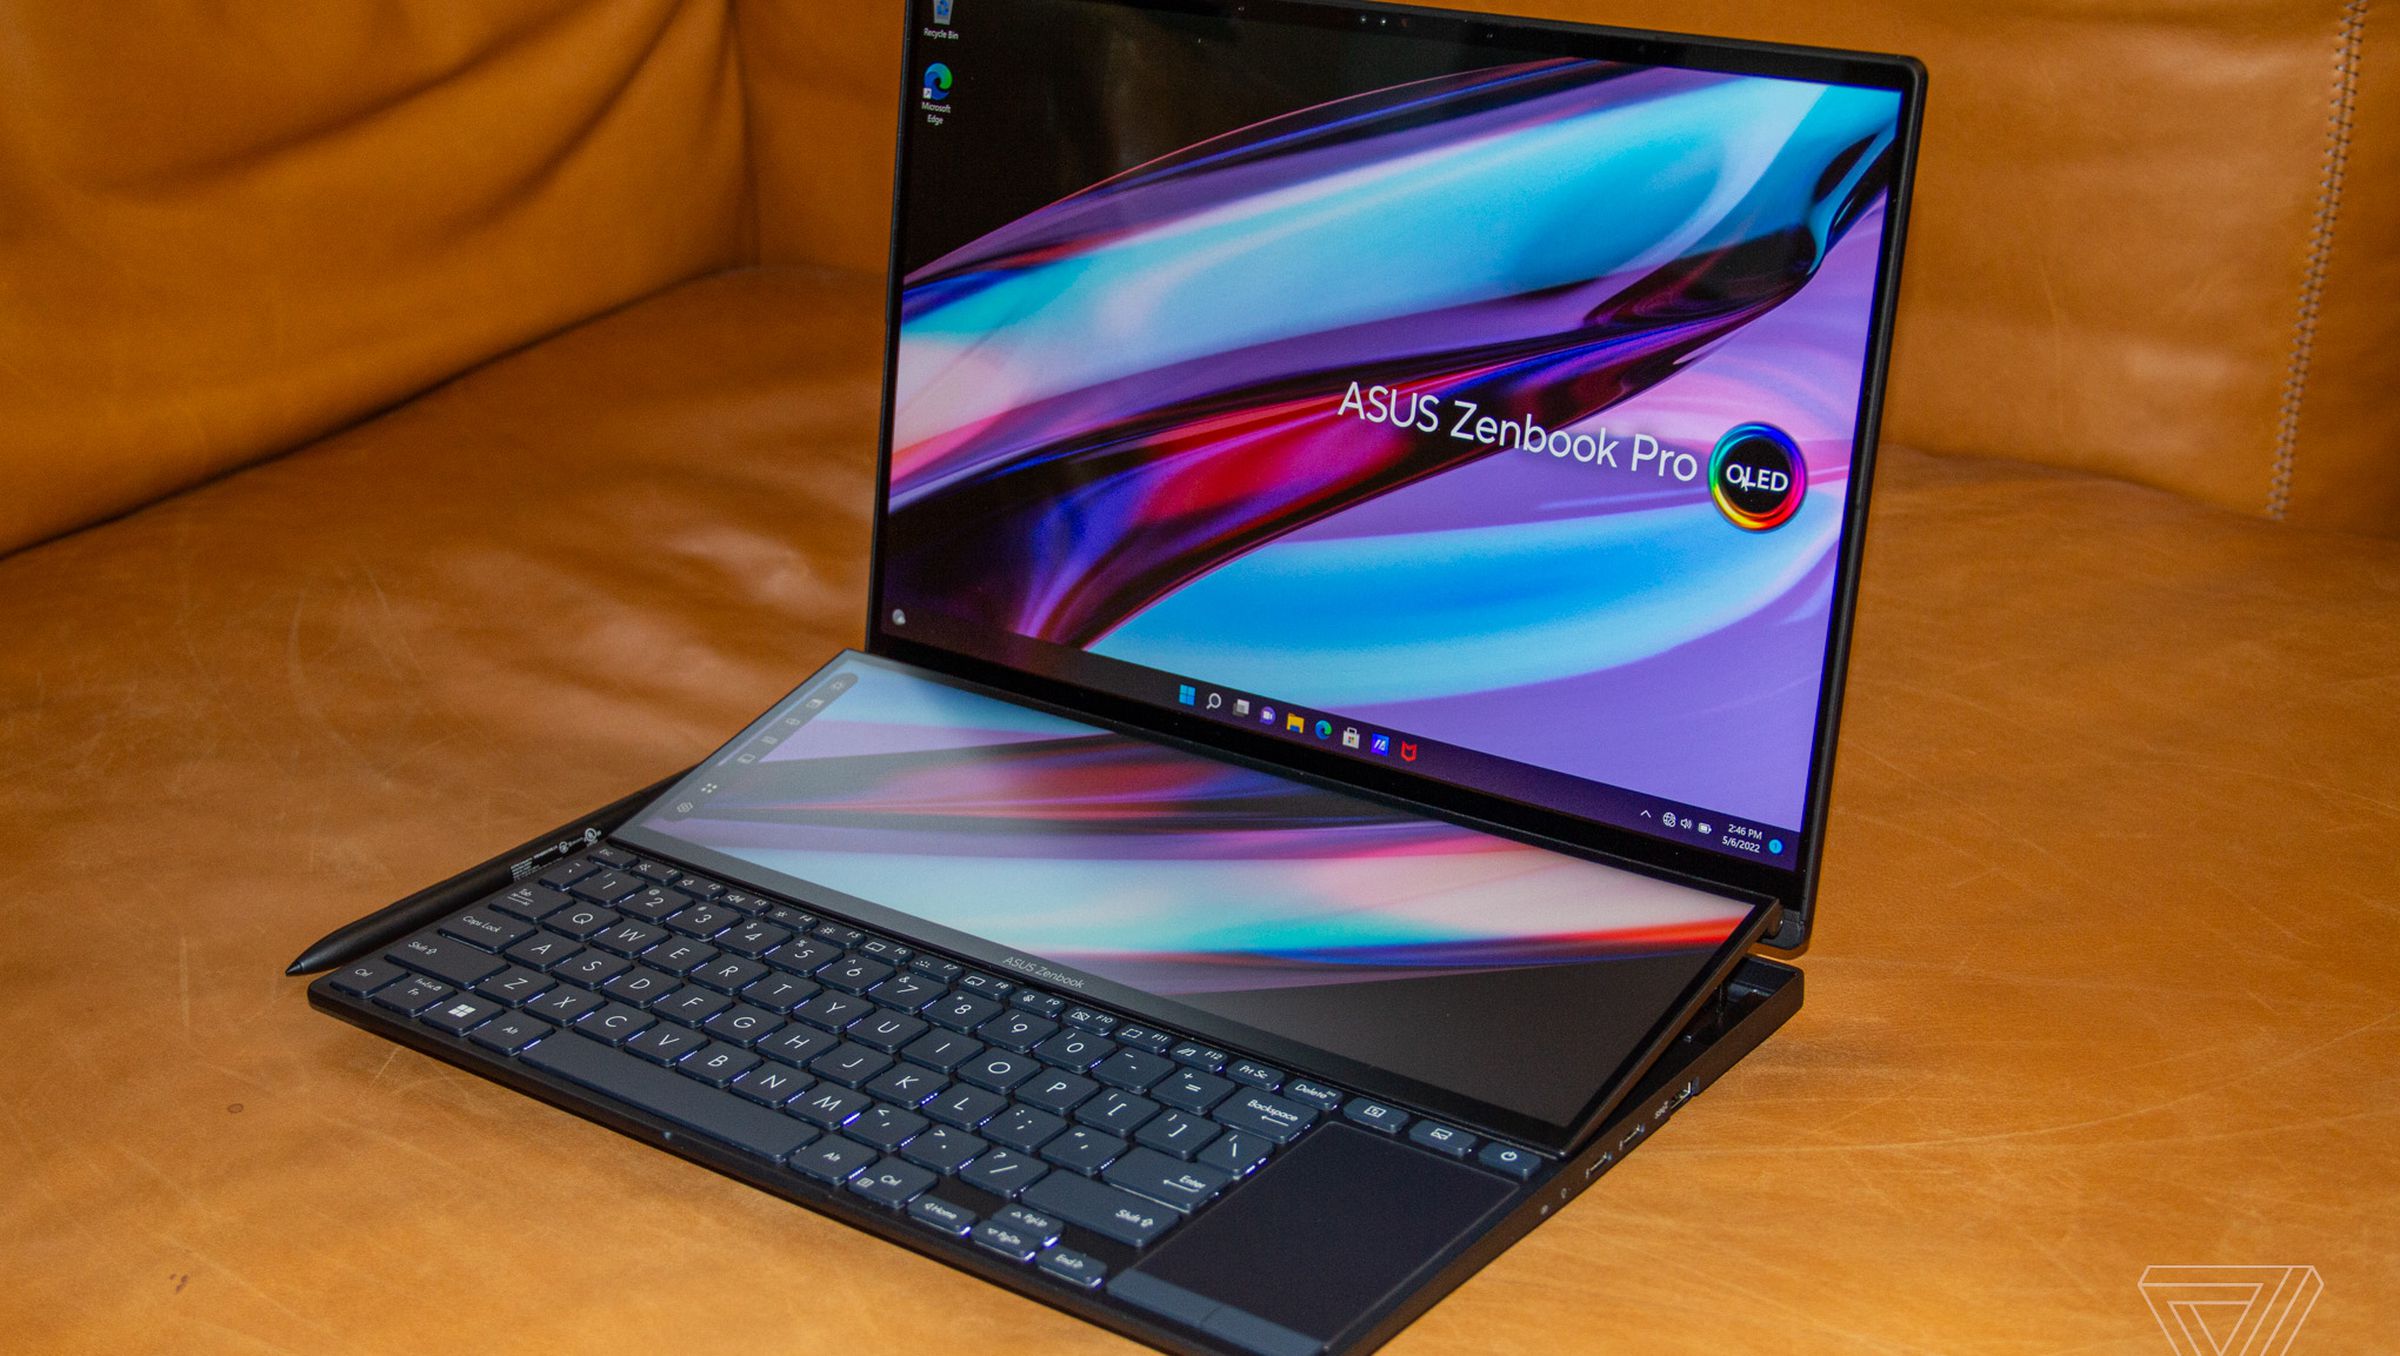 The Asus Zenbook Pro 14 Duo angled to the left side on a brown couch. Both screens display a multicolor background with the Asus Zenbook Pro OLED logo.